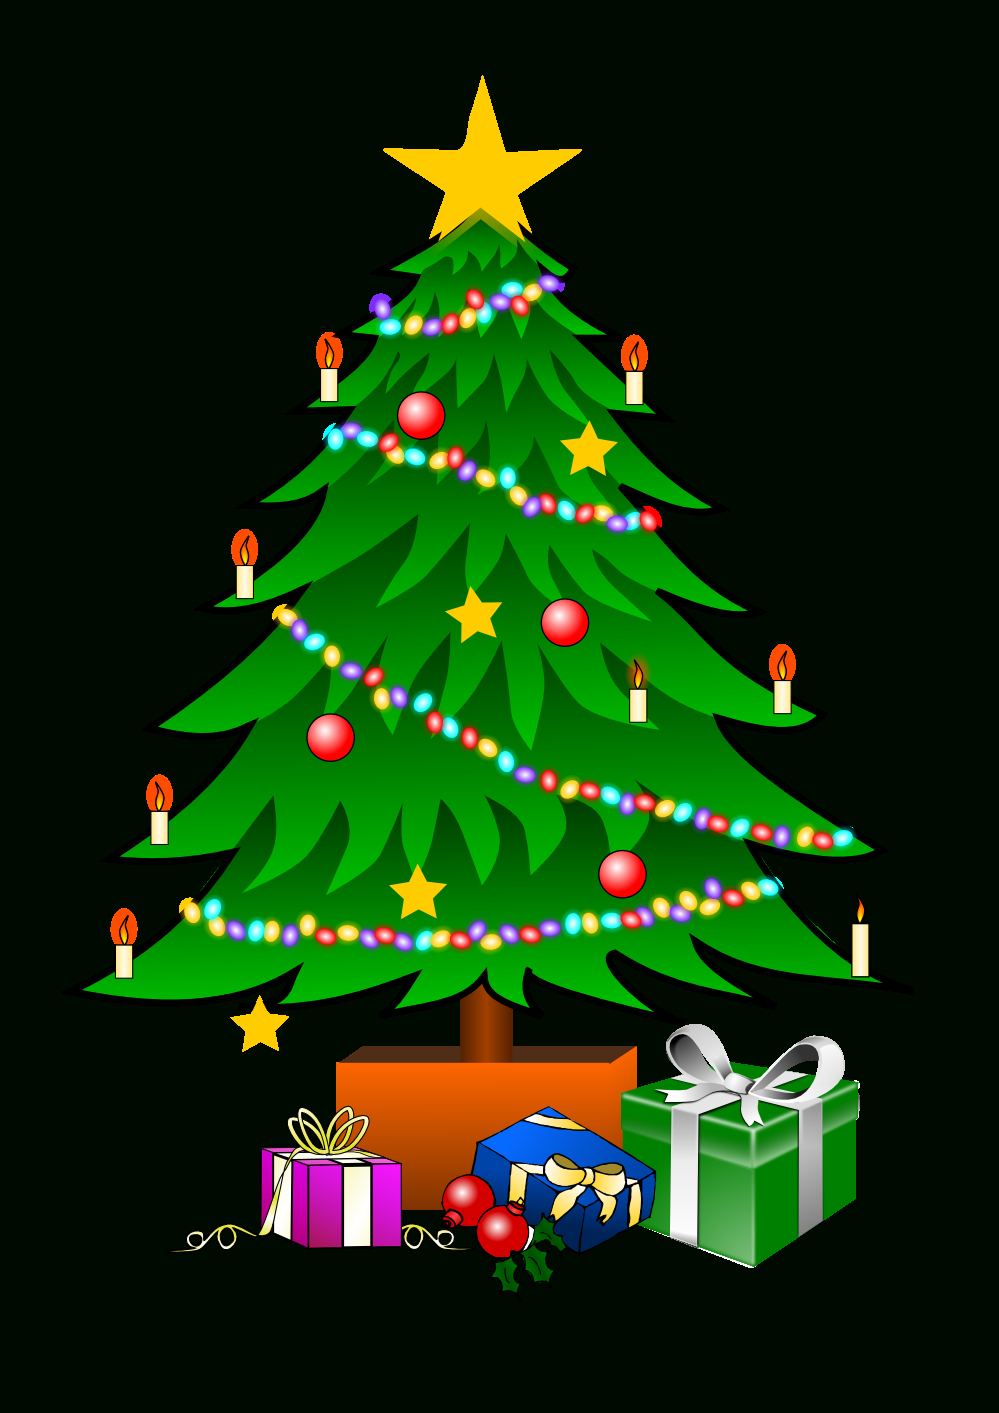 Free Christmas Tree Pics Free, Download Free Clip Art, Free Clip Art - Free Printable Christmas Tree Images